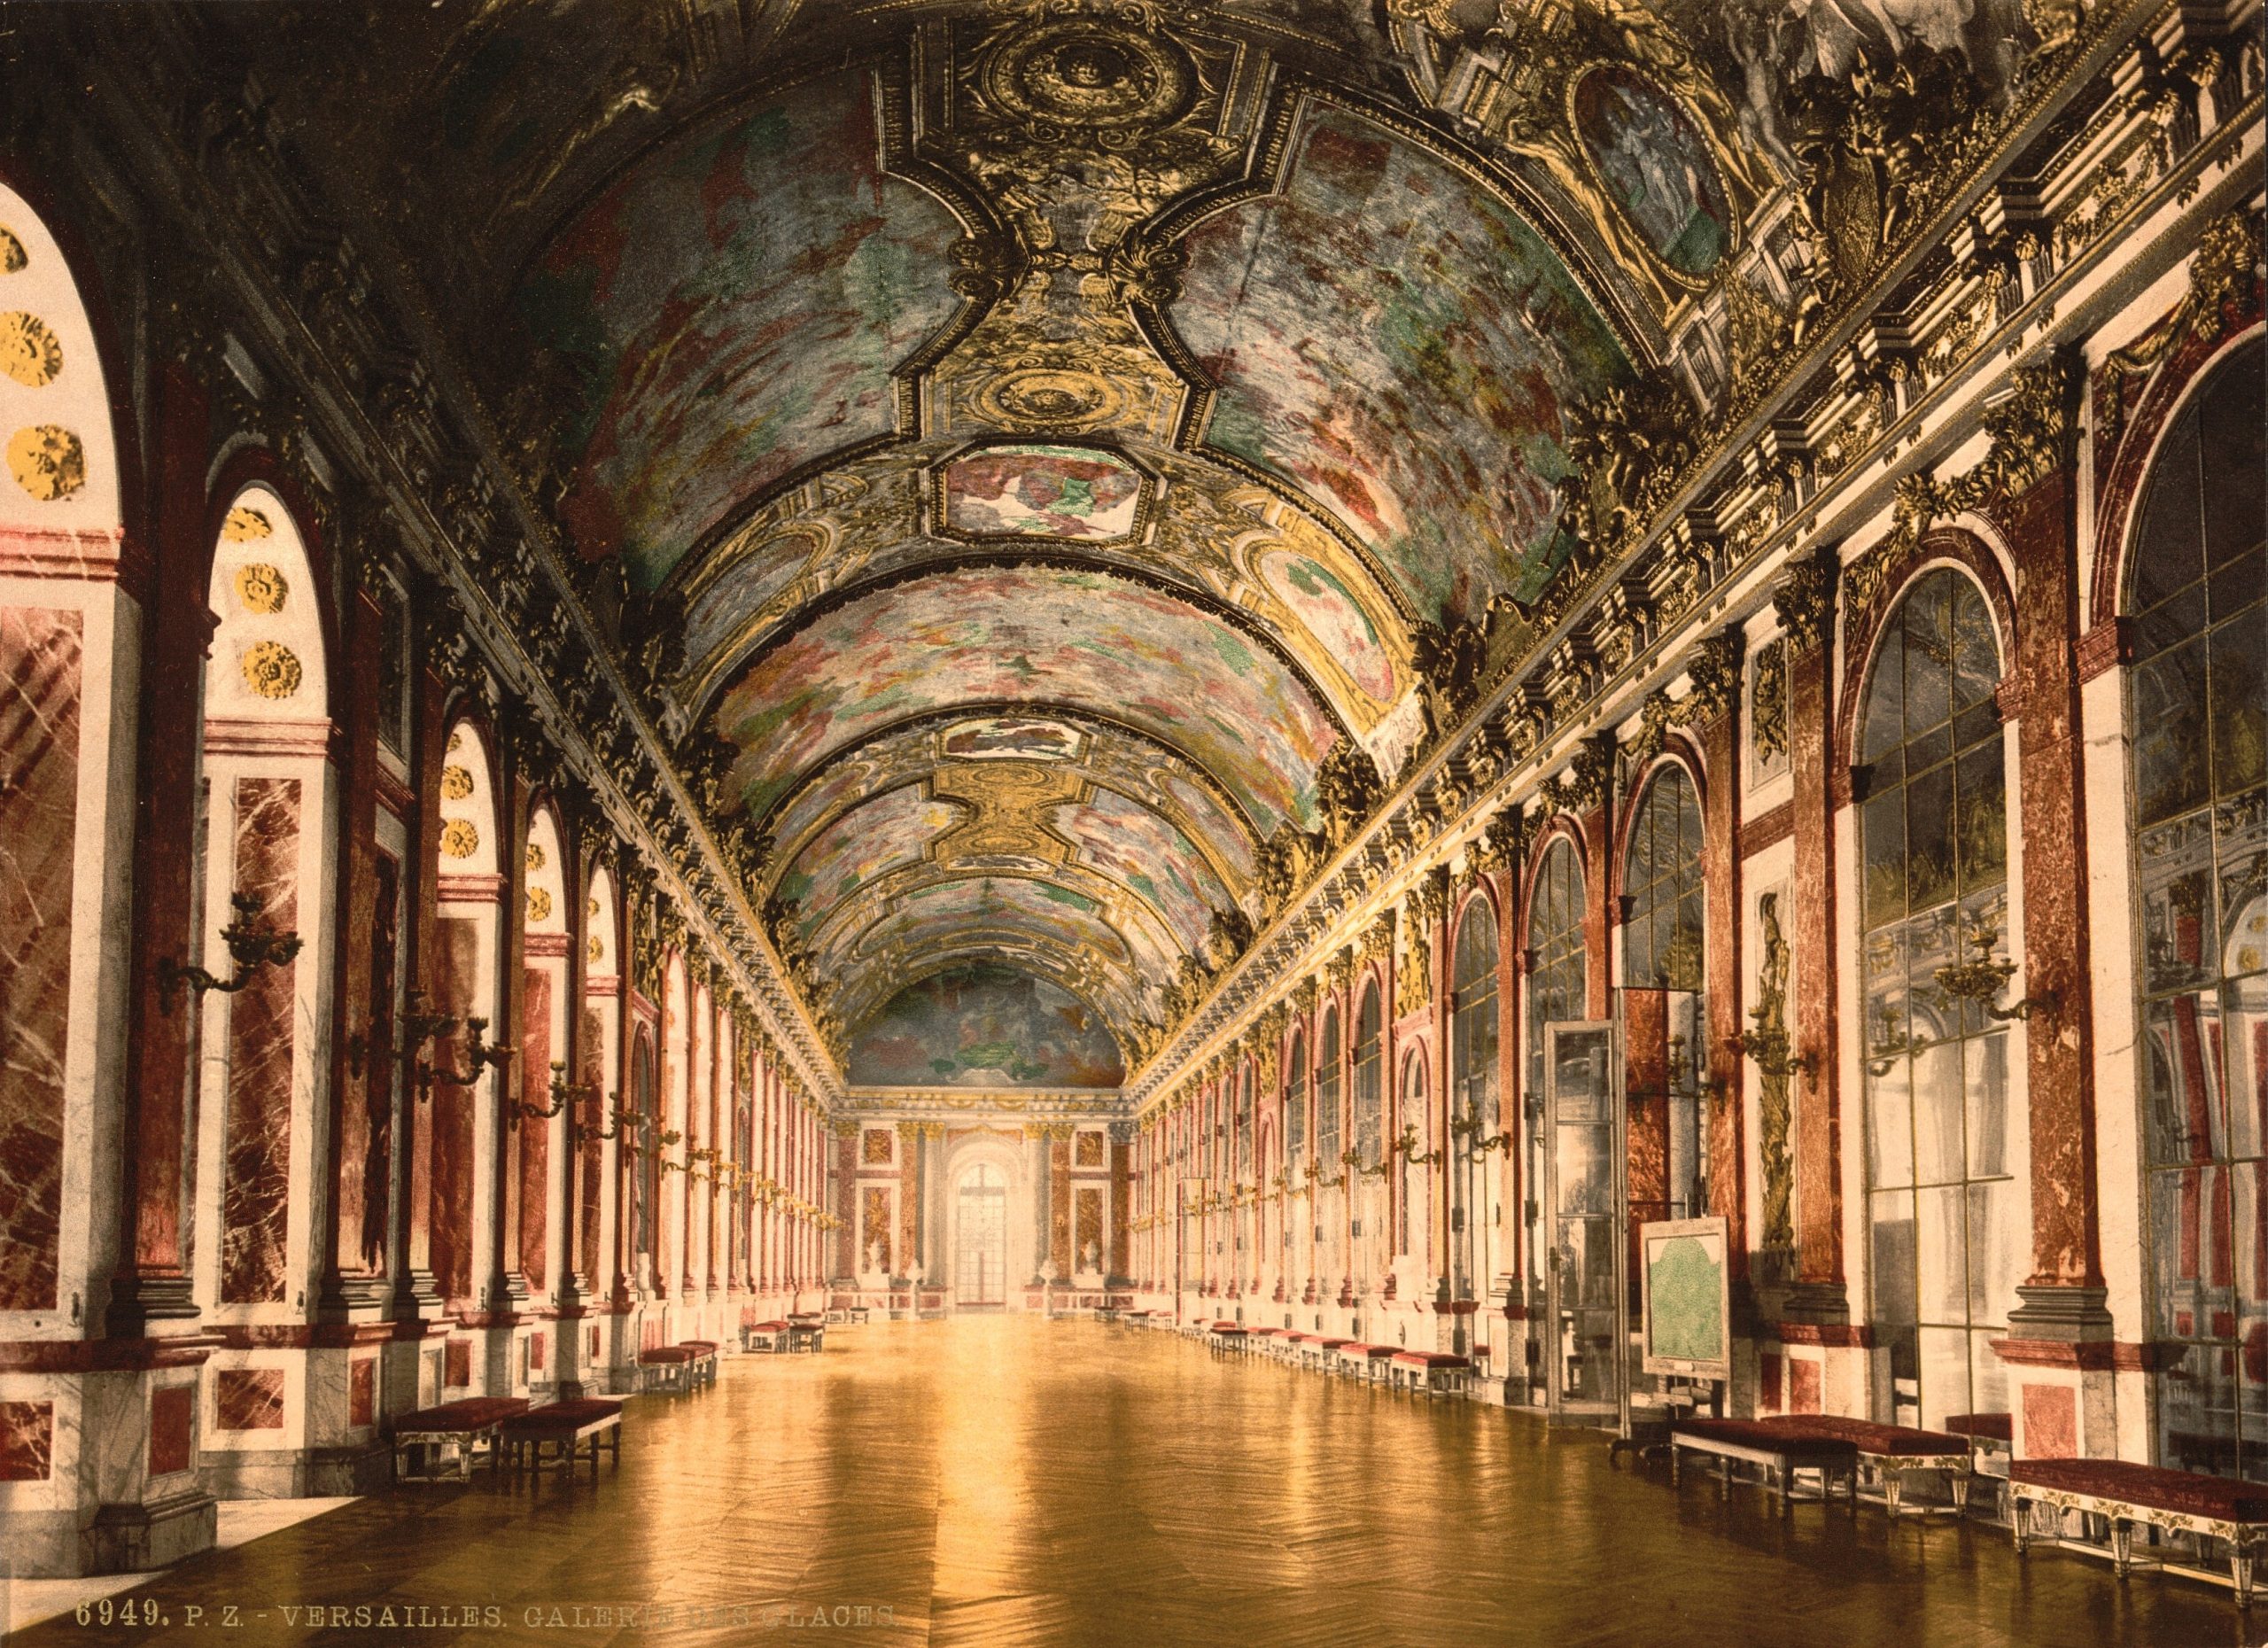 Gallery of Mirrors Versailles France